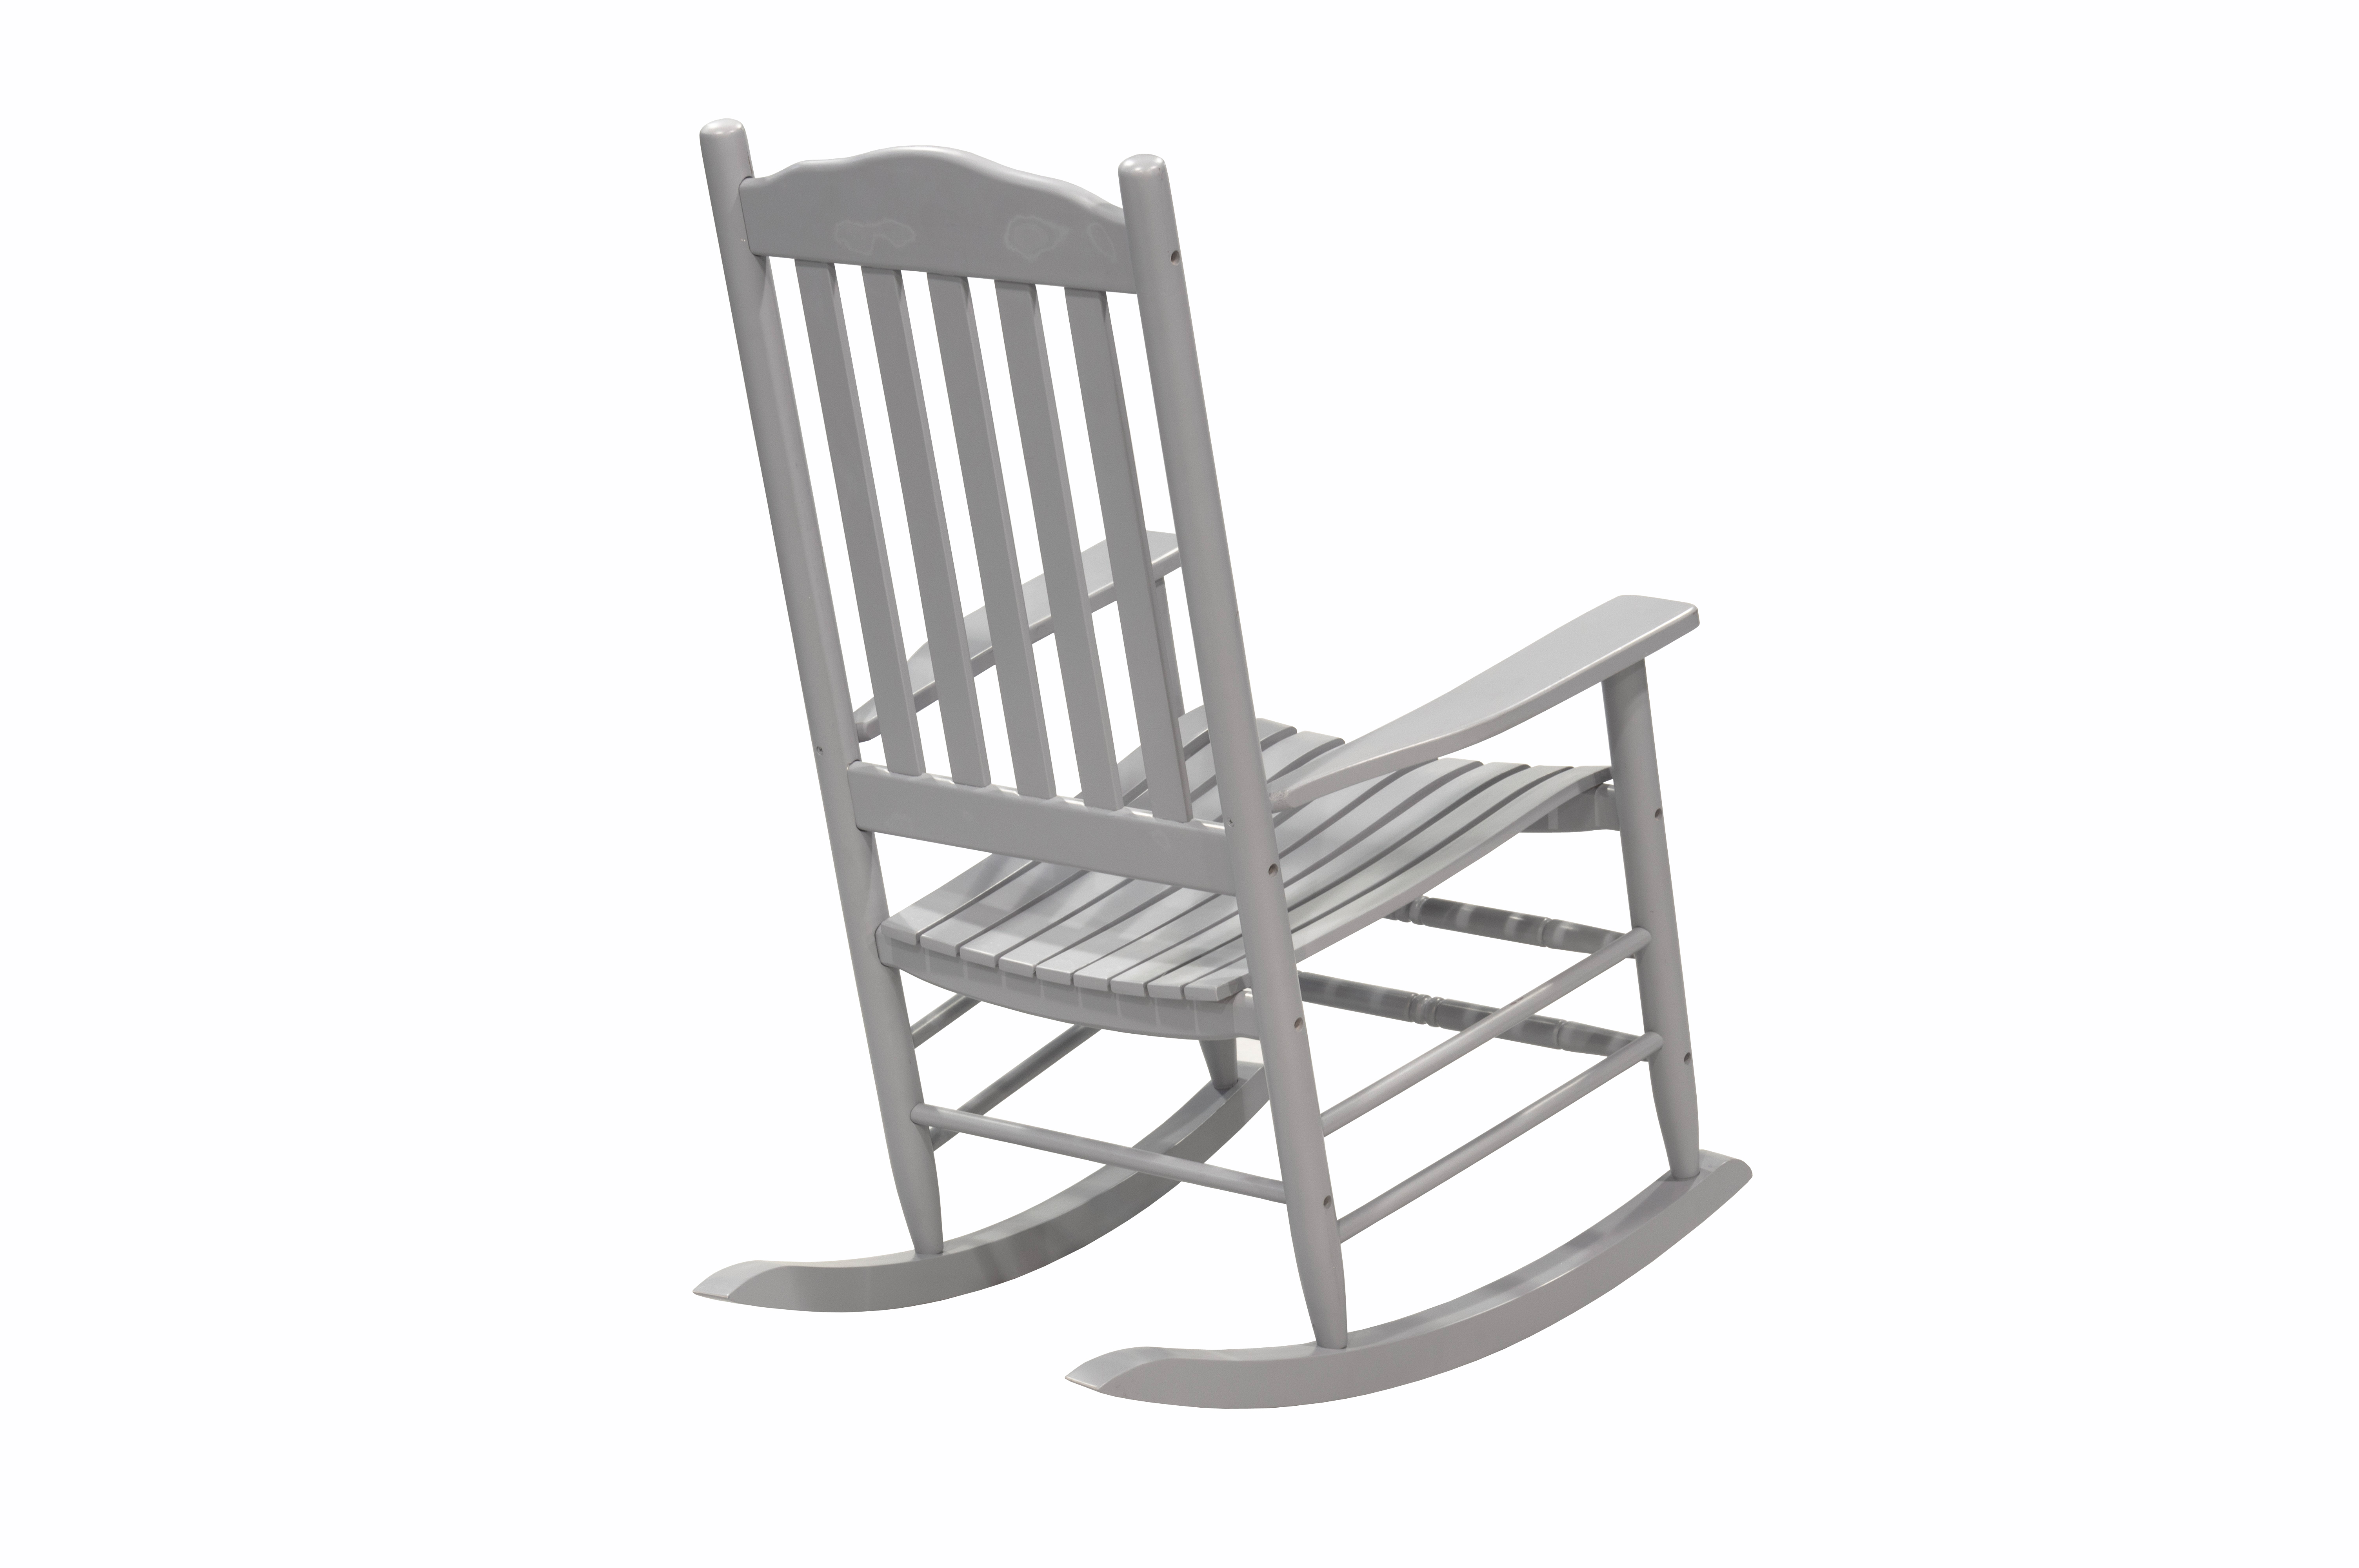 Outdoor Patio Garden Furniture 3-Piece Wood Porch Rocking Chair Set, Weather Resistant Finish, 2 Rocking Chairs and 1 Side Table - Gray - image 3 of 11